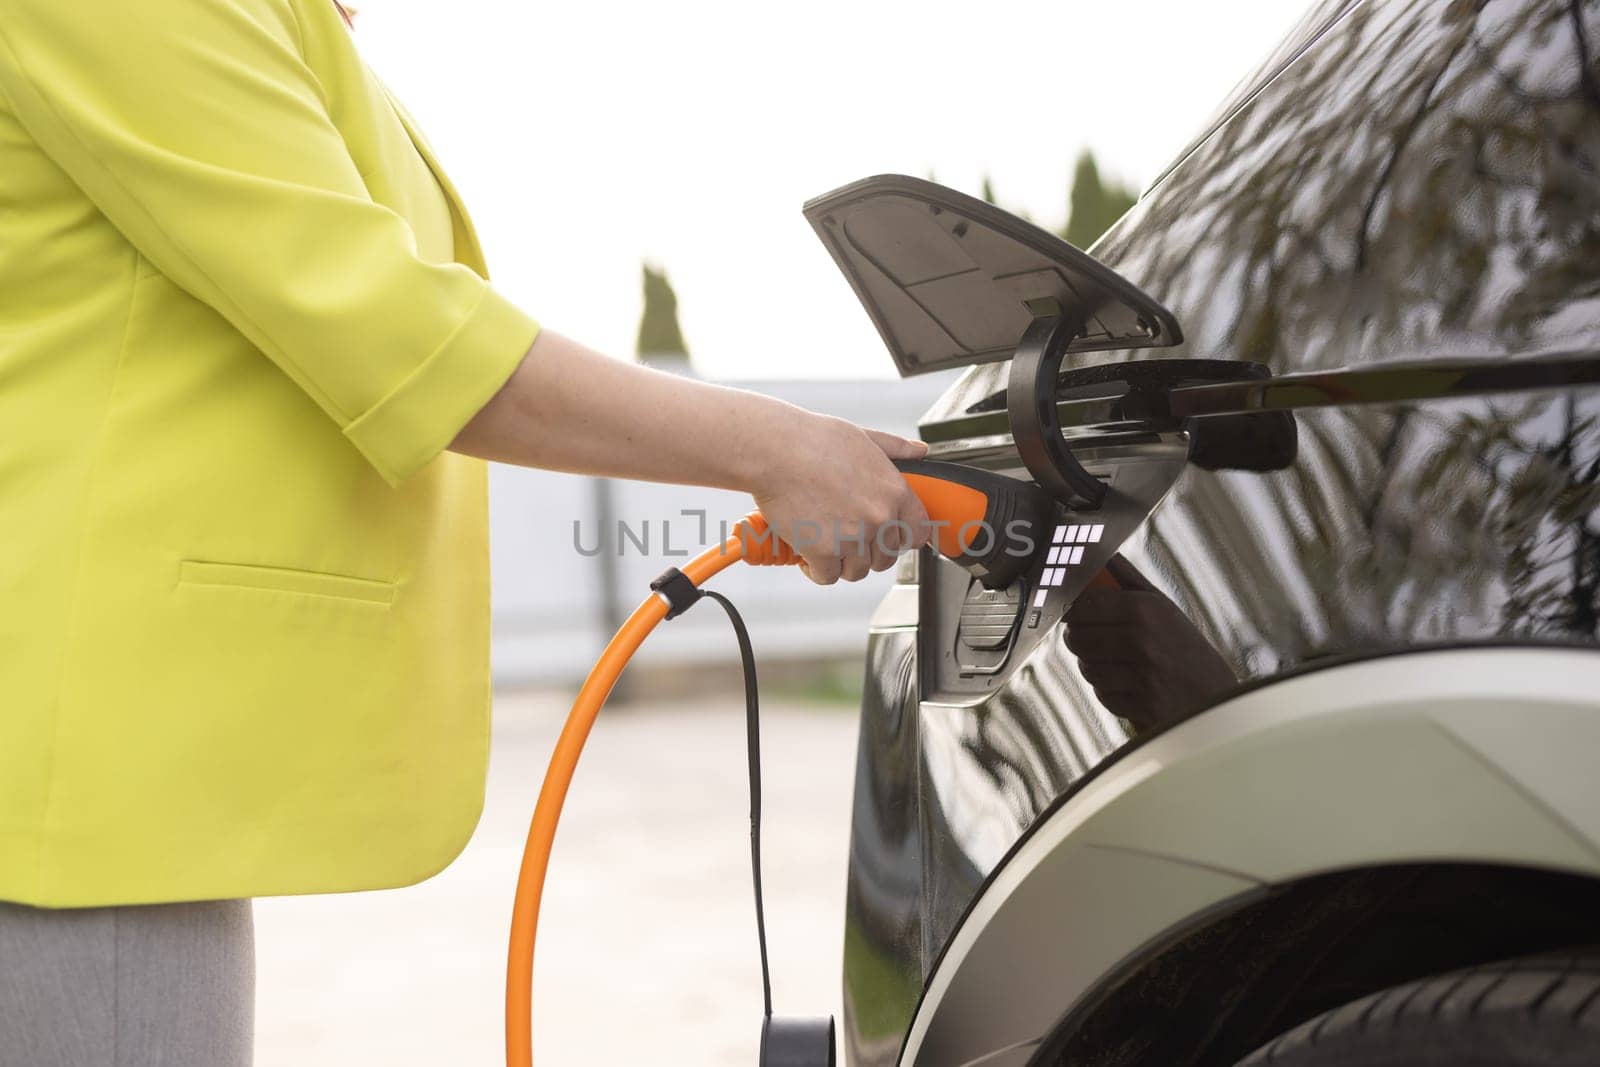 The driver of the electric car inserts the electrical connector to charge the batteries. Unrecognizable woman attaching power cable to electric car. Electric vehicle Recharging battery charging port by uflypro